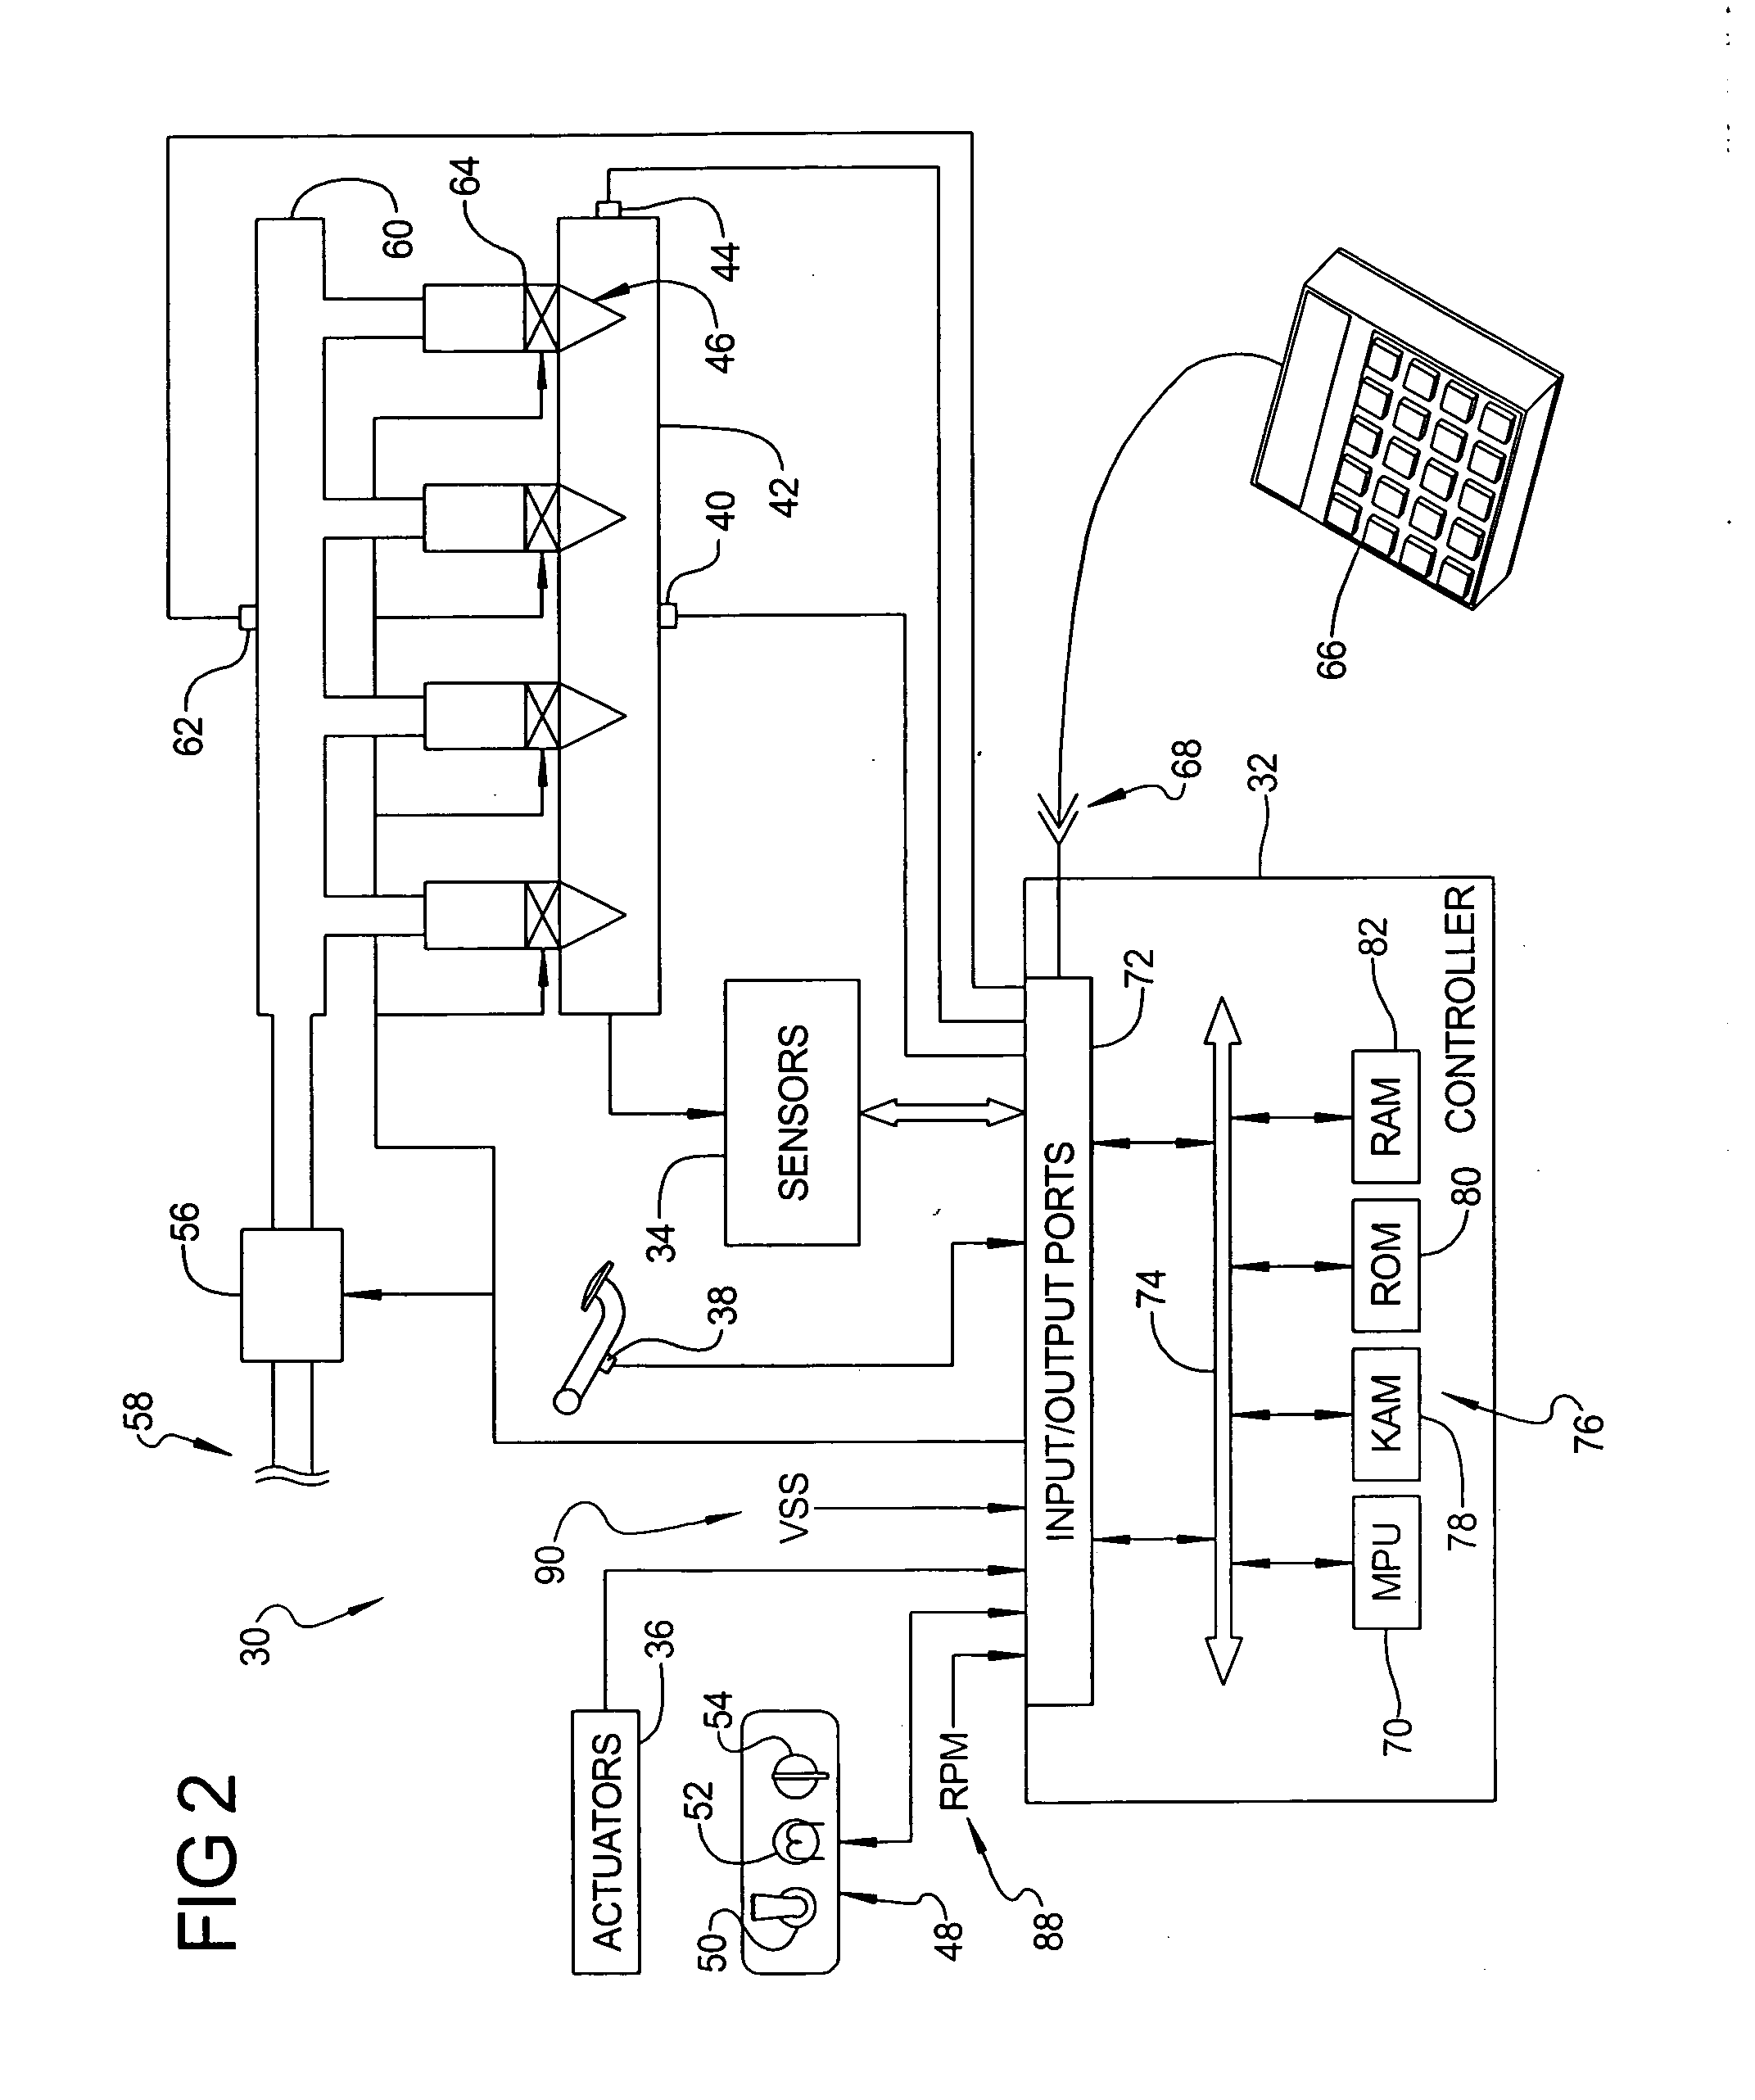 Method and system of enhanced vehicle road speed limiting